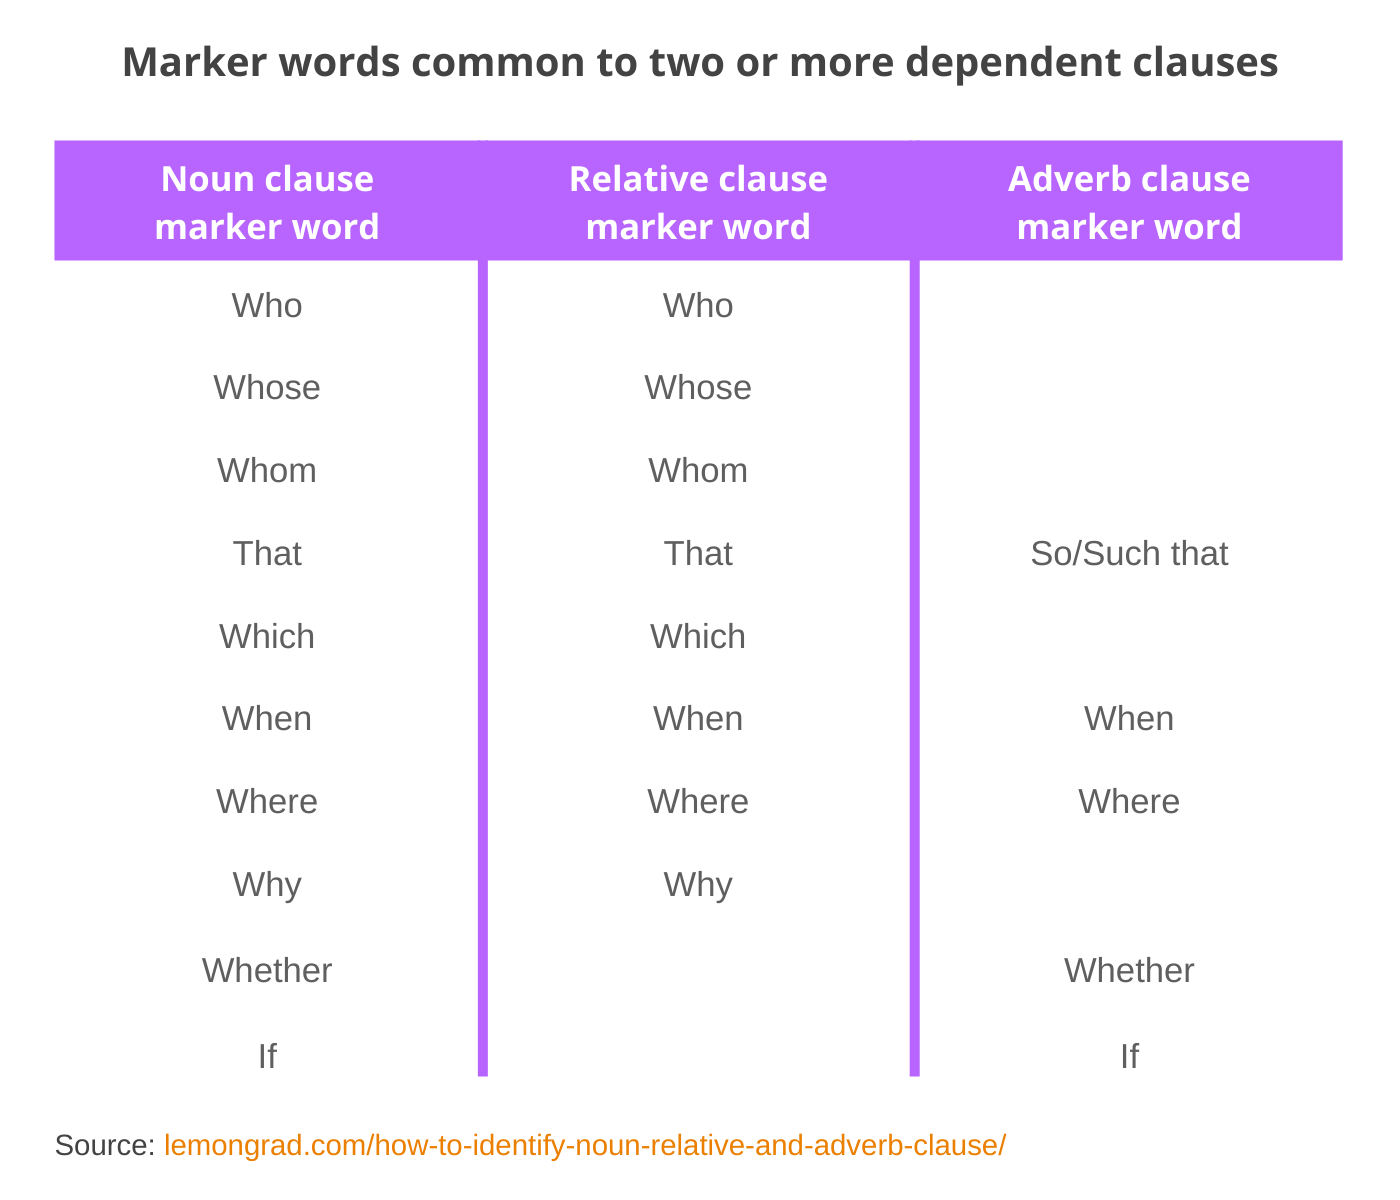 Marker words common to two or more dependent clauses